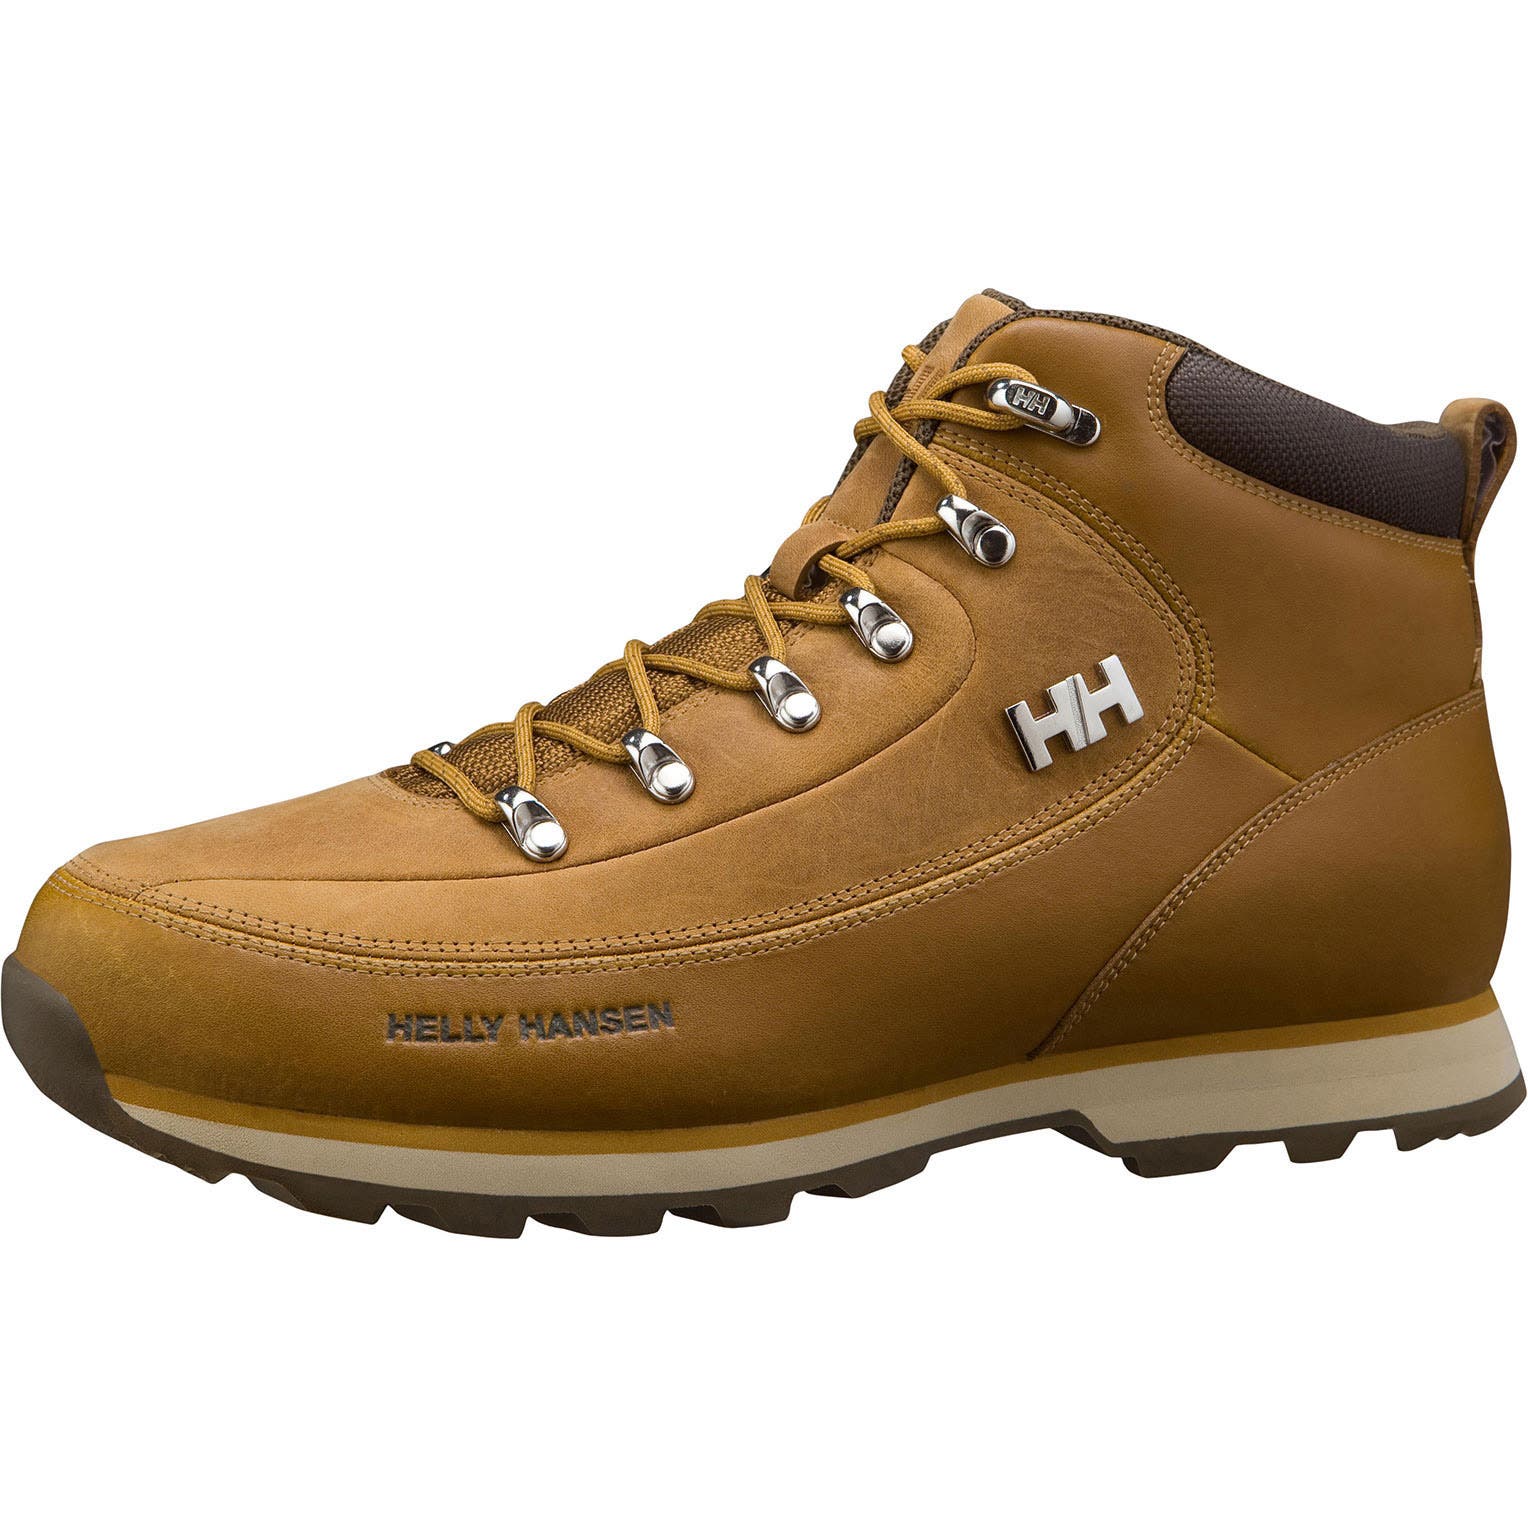 Helly Hansen Men's The Forester Winter Boot in Bone Brown-Hh Khaki from the side